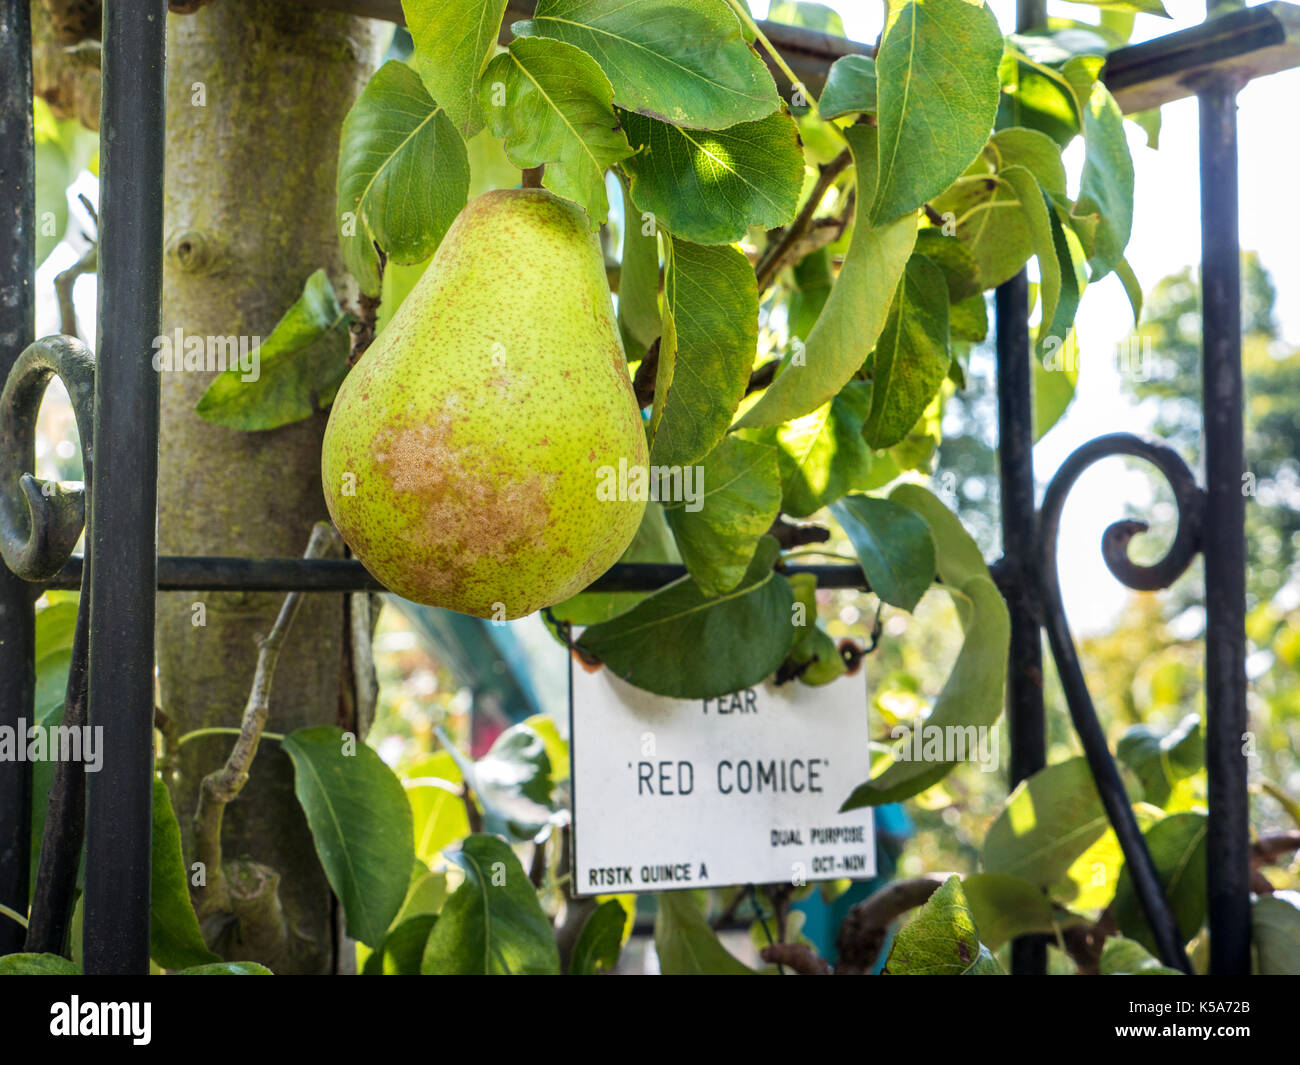 Red Comice (Doyenné du Comice) pears supported on attractive metal frame ripening for harvest Stock Photo